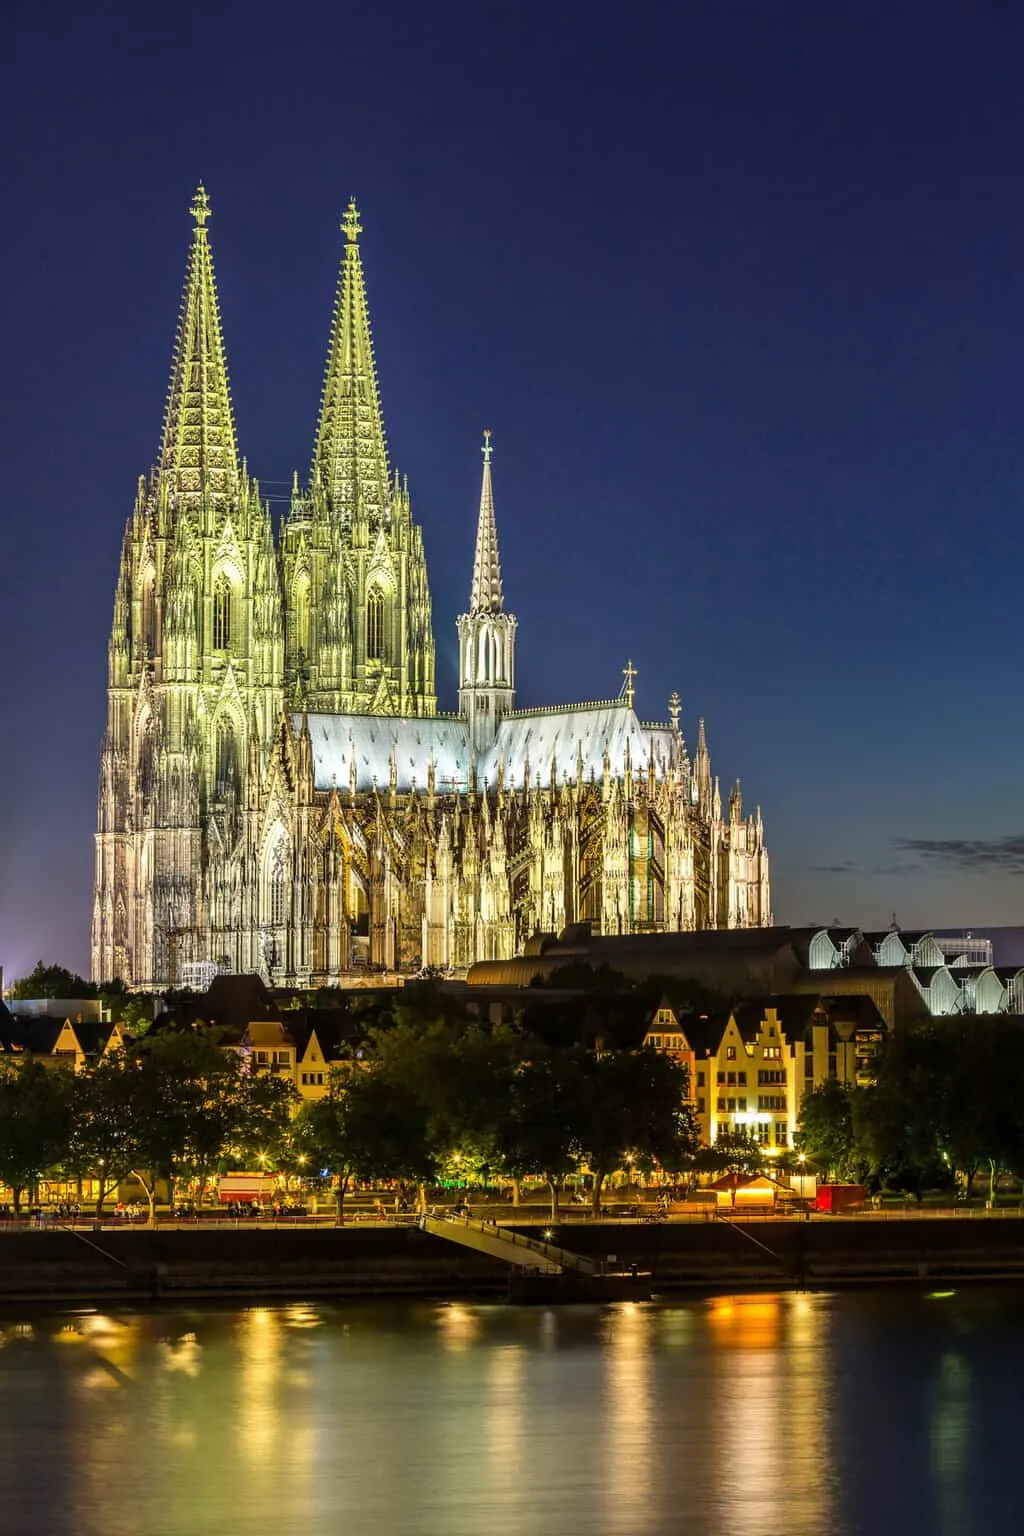 The Cologne cathedral lit up at night.